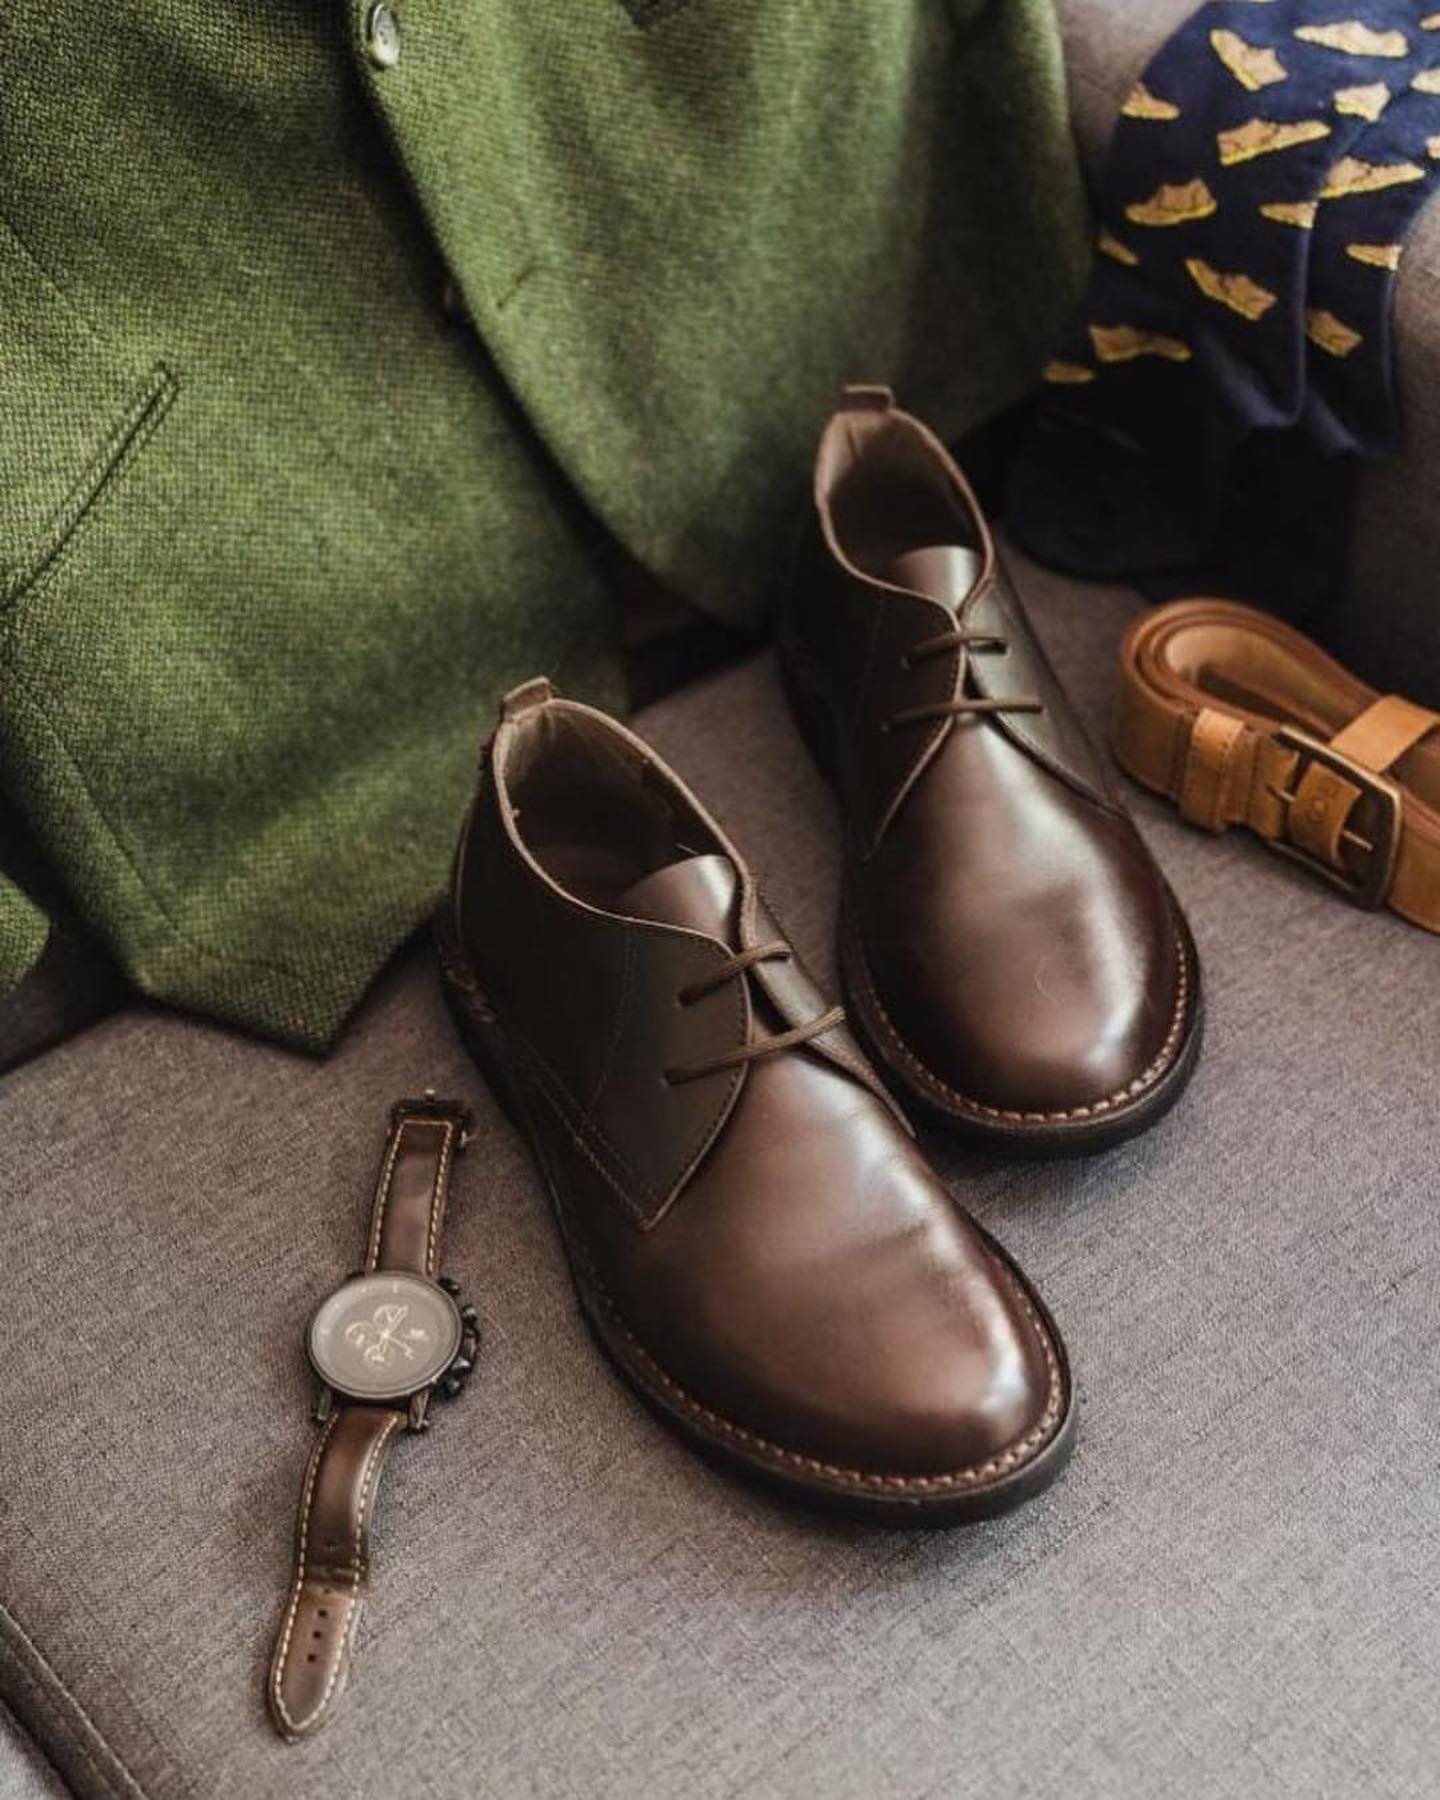 What dad really wants for Father\'s Day🙌 

Last chance to receive 10% off + free shipping! Use our discount code FATHERS10 when ordering his next favorite Veldskoens!
.
.
.
#giftsforhim #mensshoes #fathersdaygifts #everydaystyle #ootd #mensfashion #menastyle #luxury #southafricanfashion #africafashion #sustainablymade